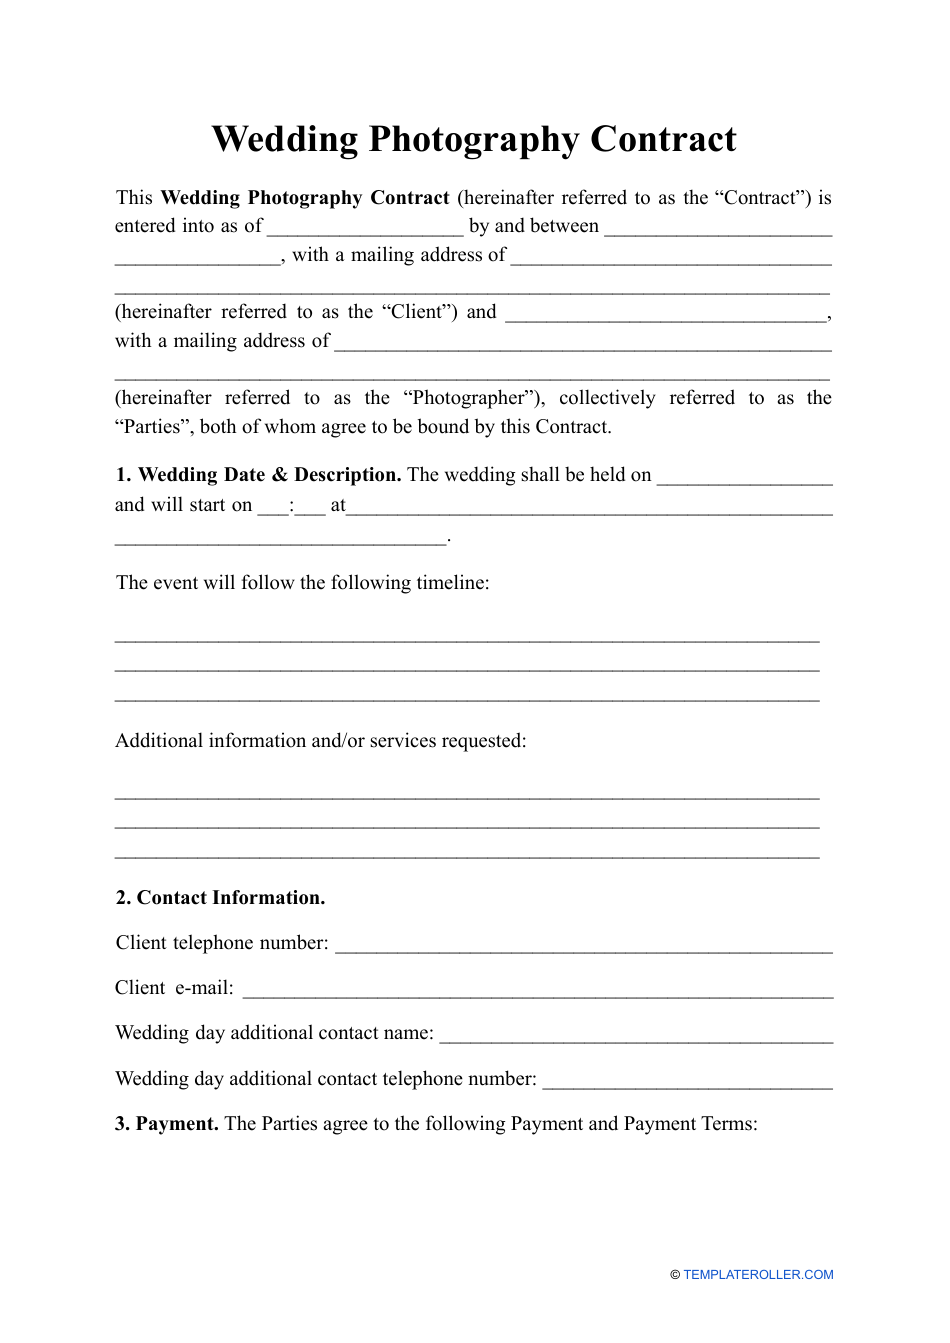 Wedding Photography Contract Template, Page 1